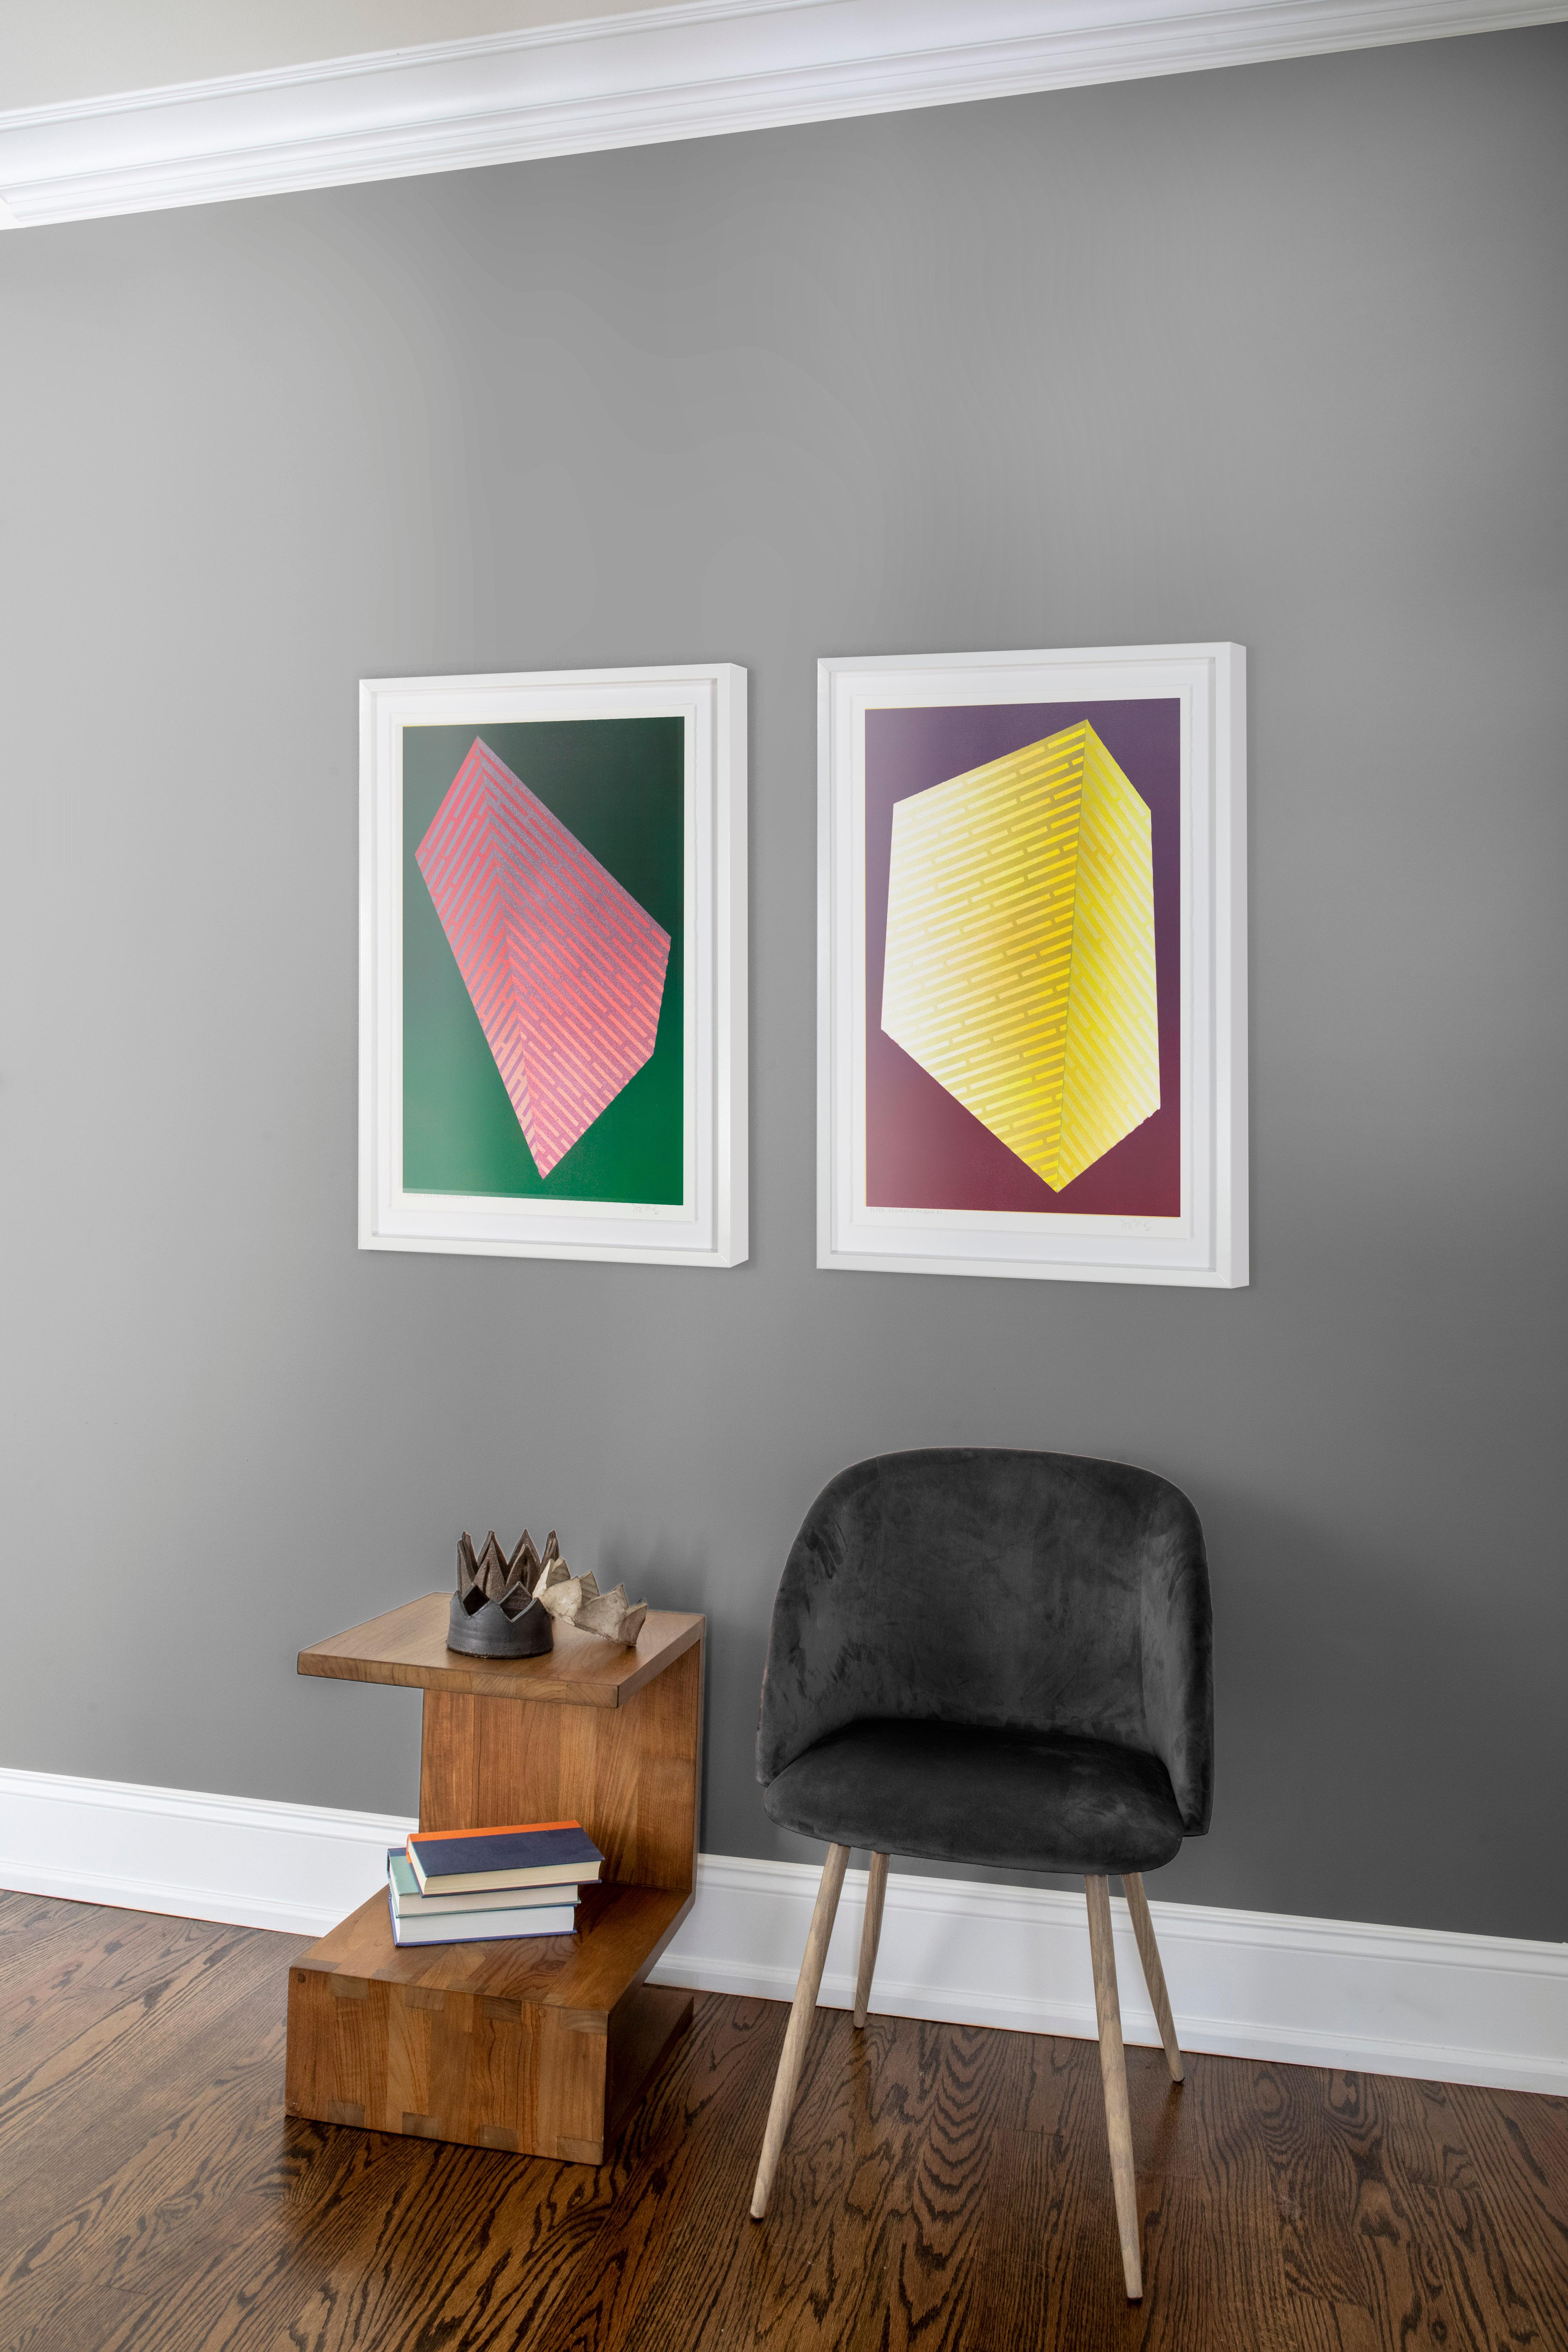 Luminescent Polygon VI: Matisse-inspired geometric abstract painting in pink - Black Abstract Painting by Jay Walker